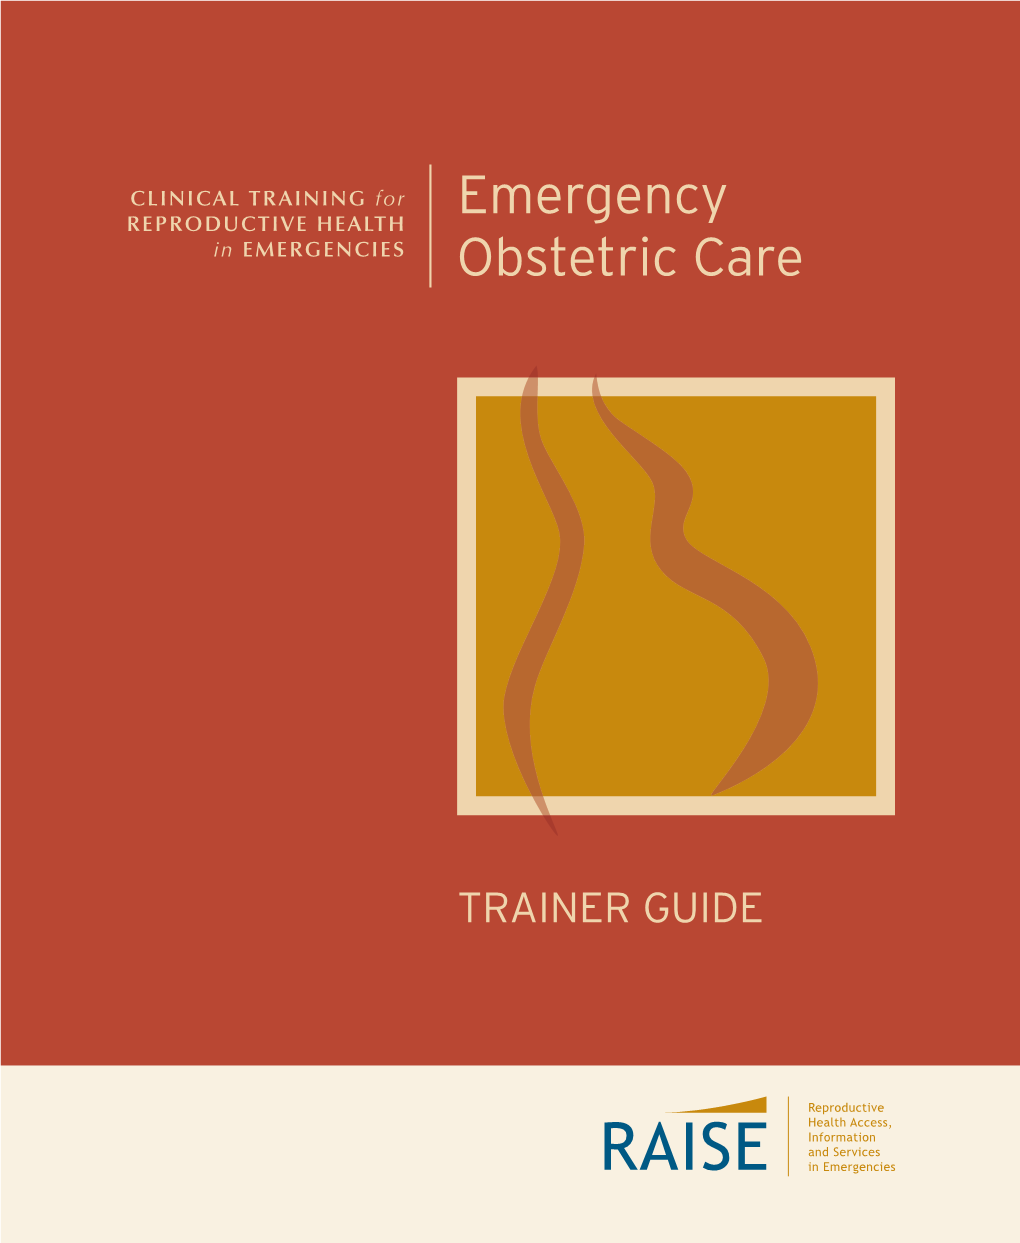 Emergency Obstetric Care